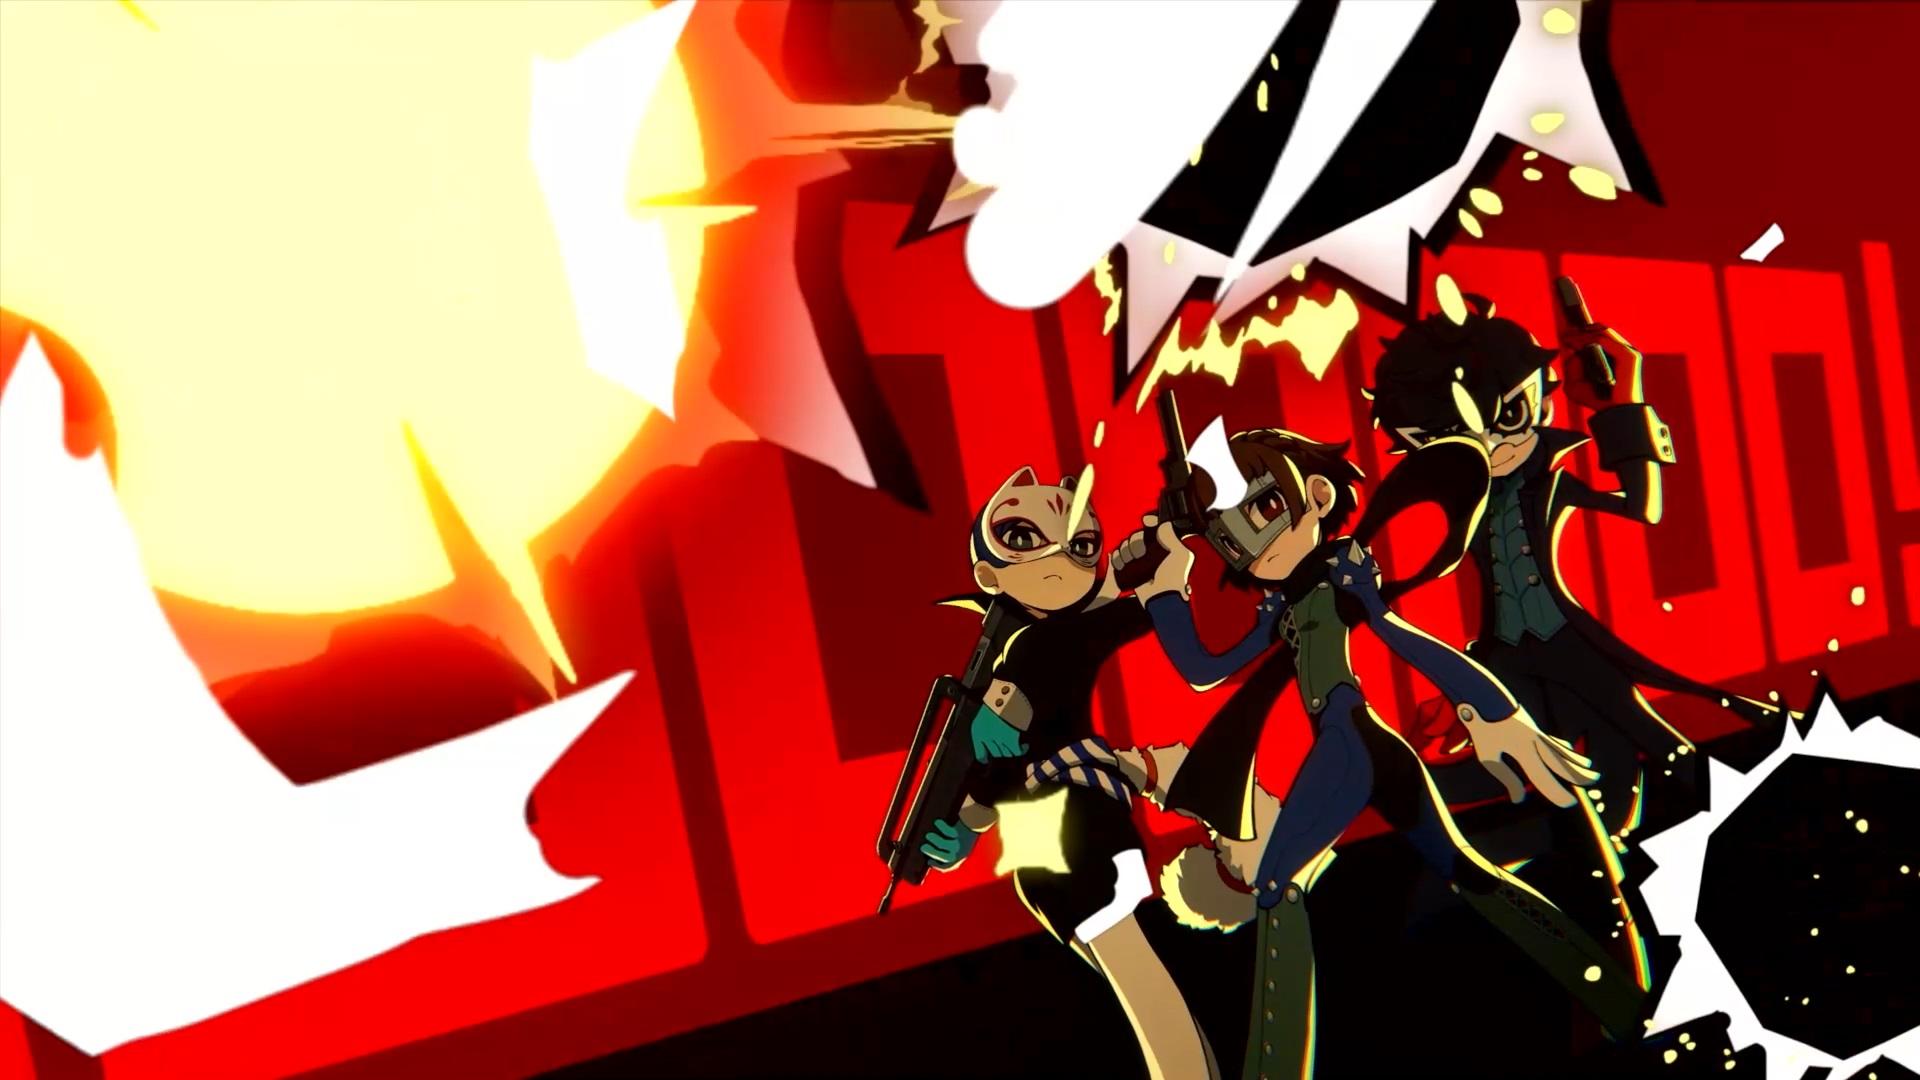 Persona 5 Tactica Preview - The Spin-Off We Never Saw Coming